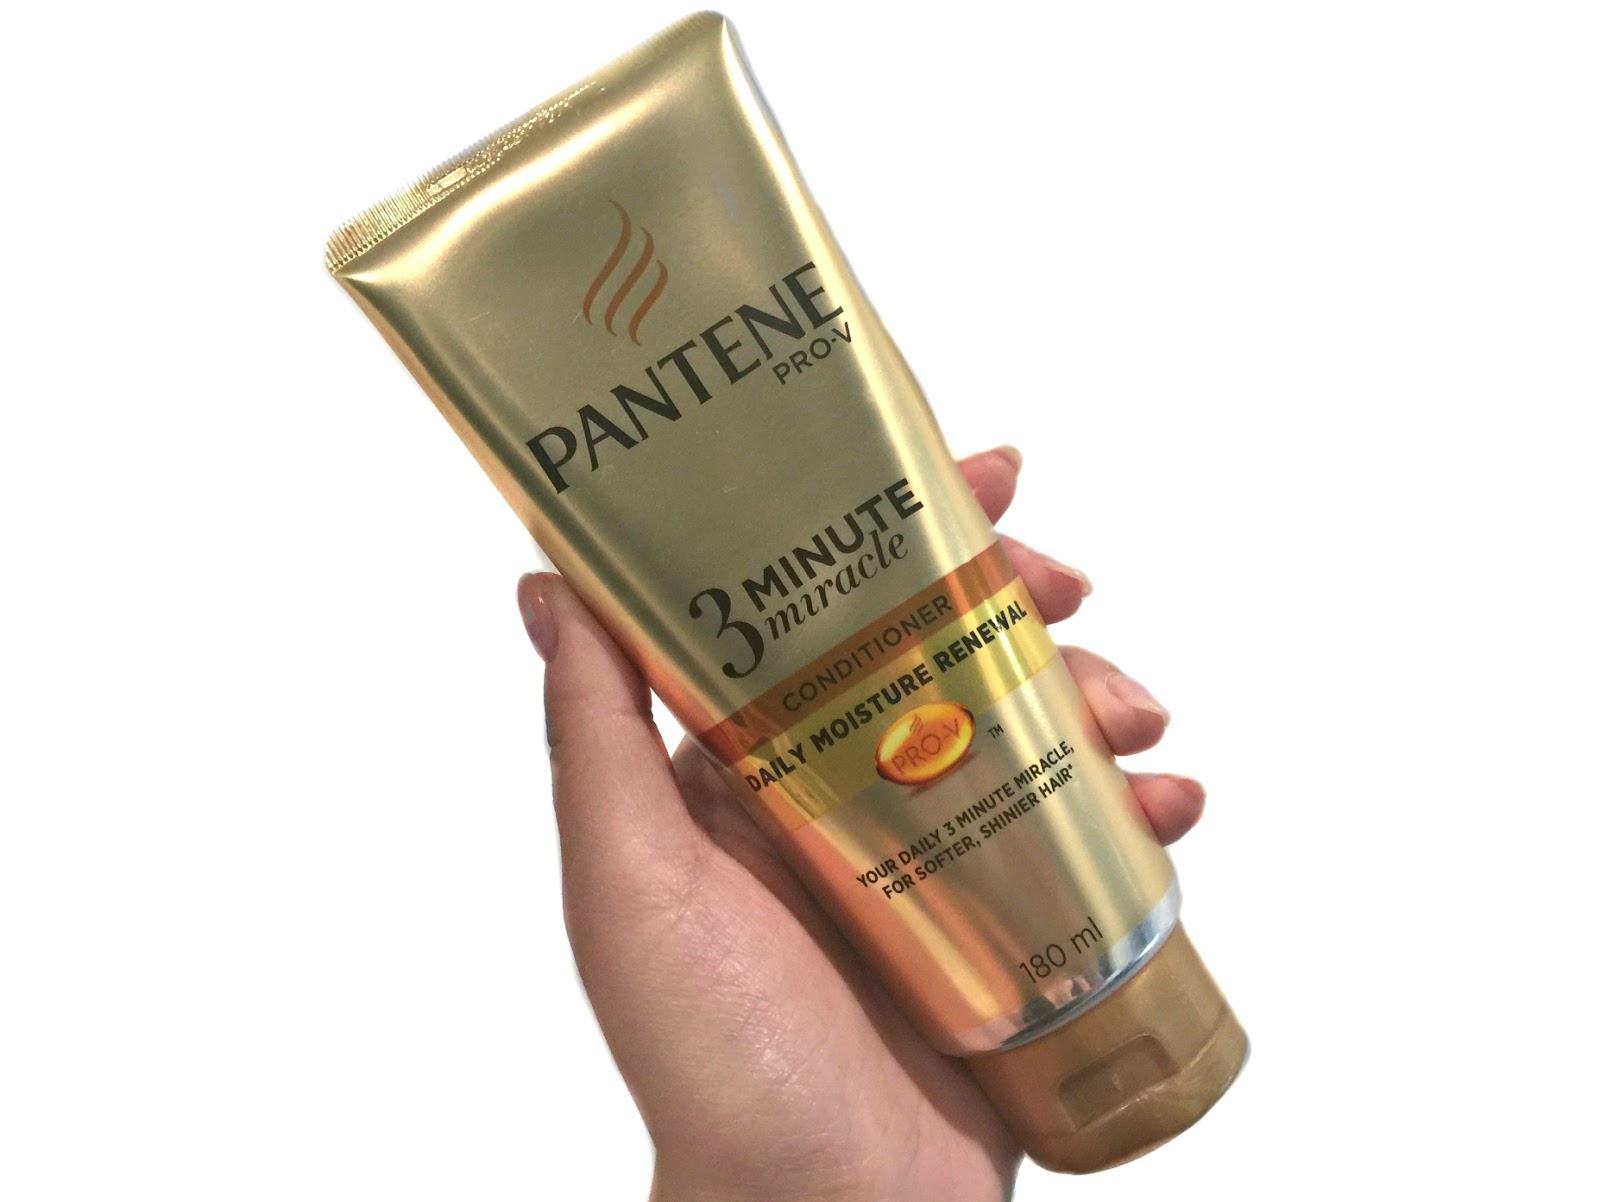 Pantene Pro-V Daily Moisture Renewal Conditioner - wide 10